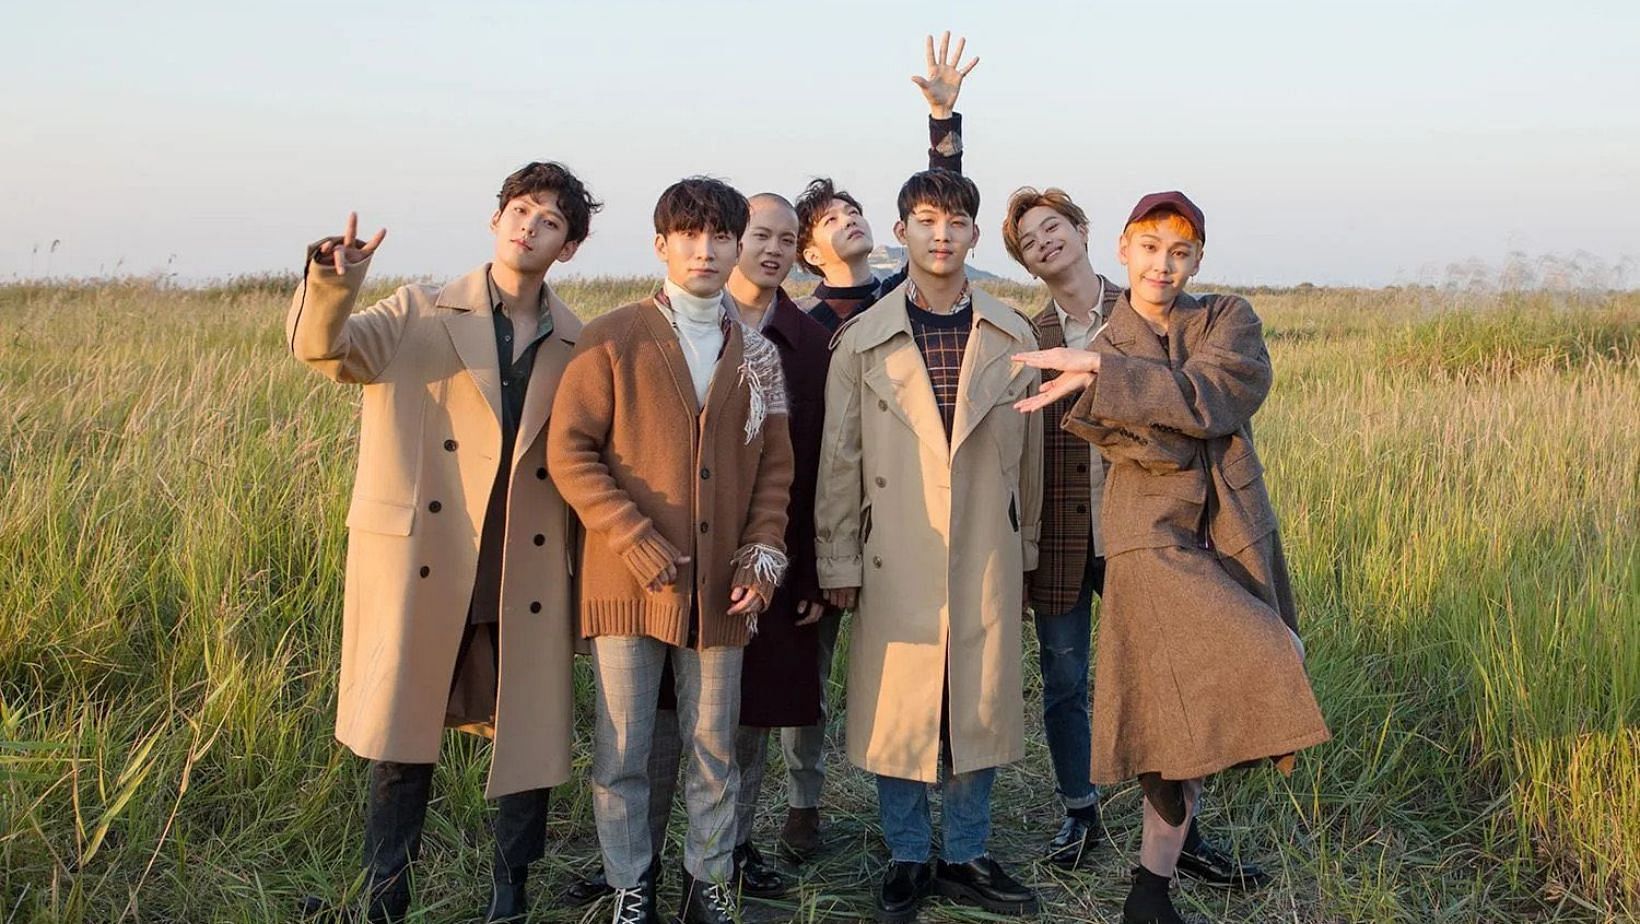 "The change might bring them more positive upgrades" BTOB’s contract